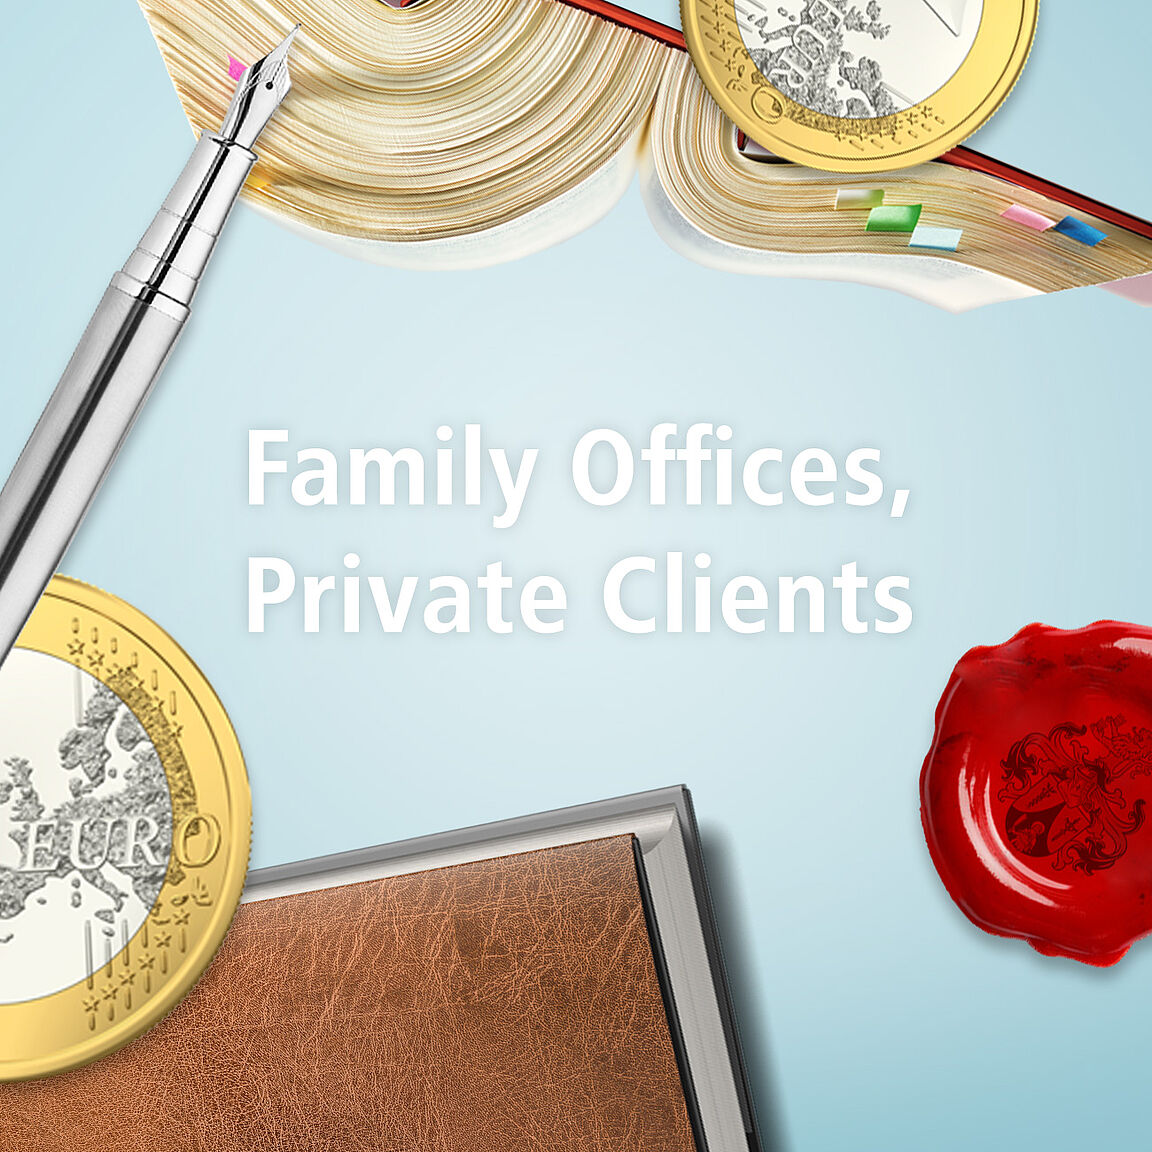 [Translate to English:] private clients, family offices